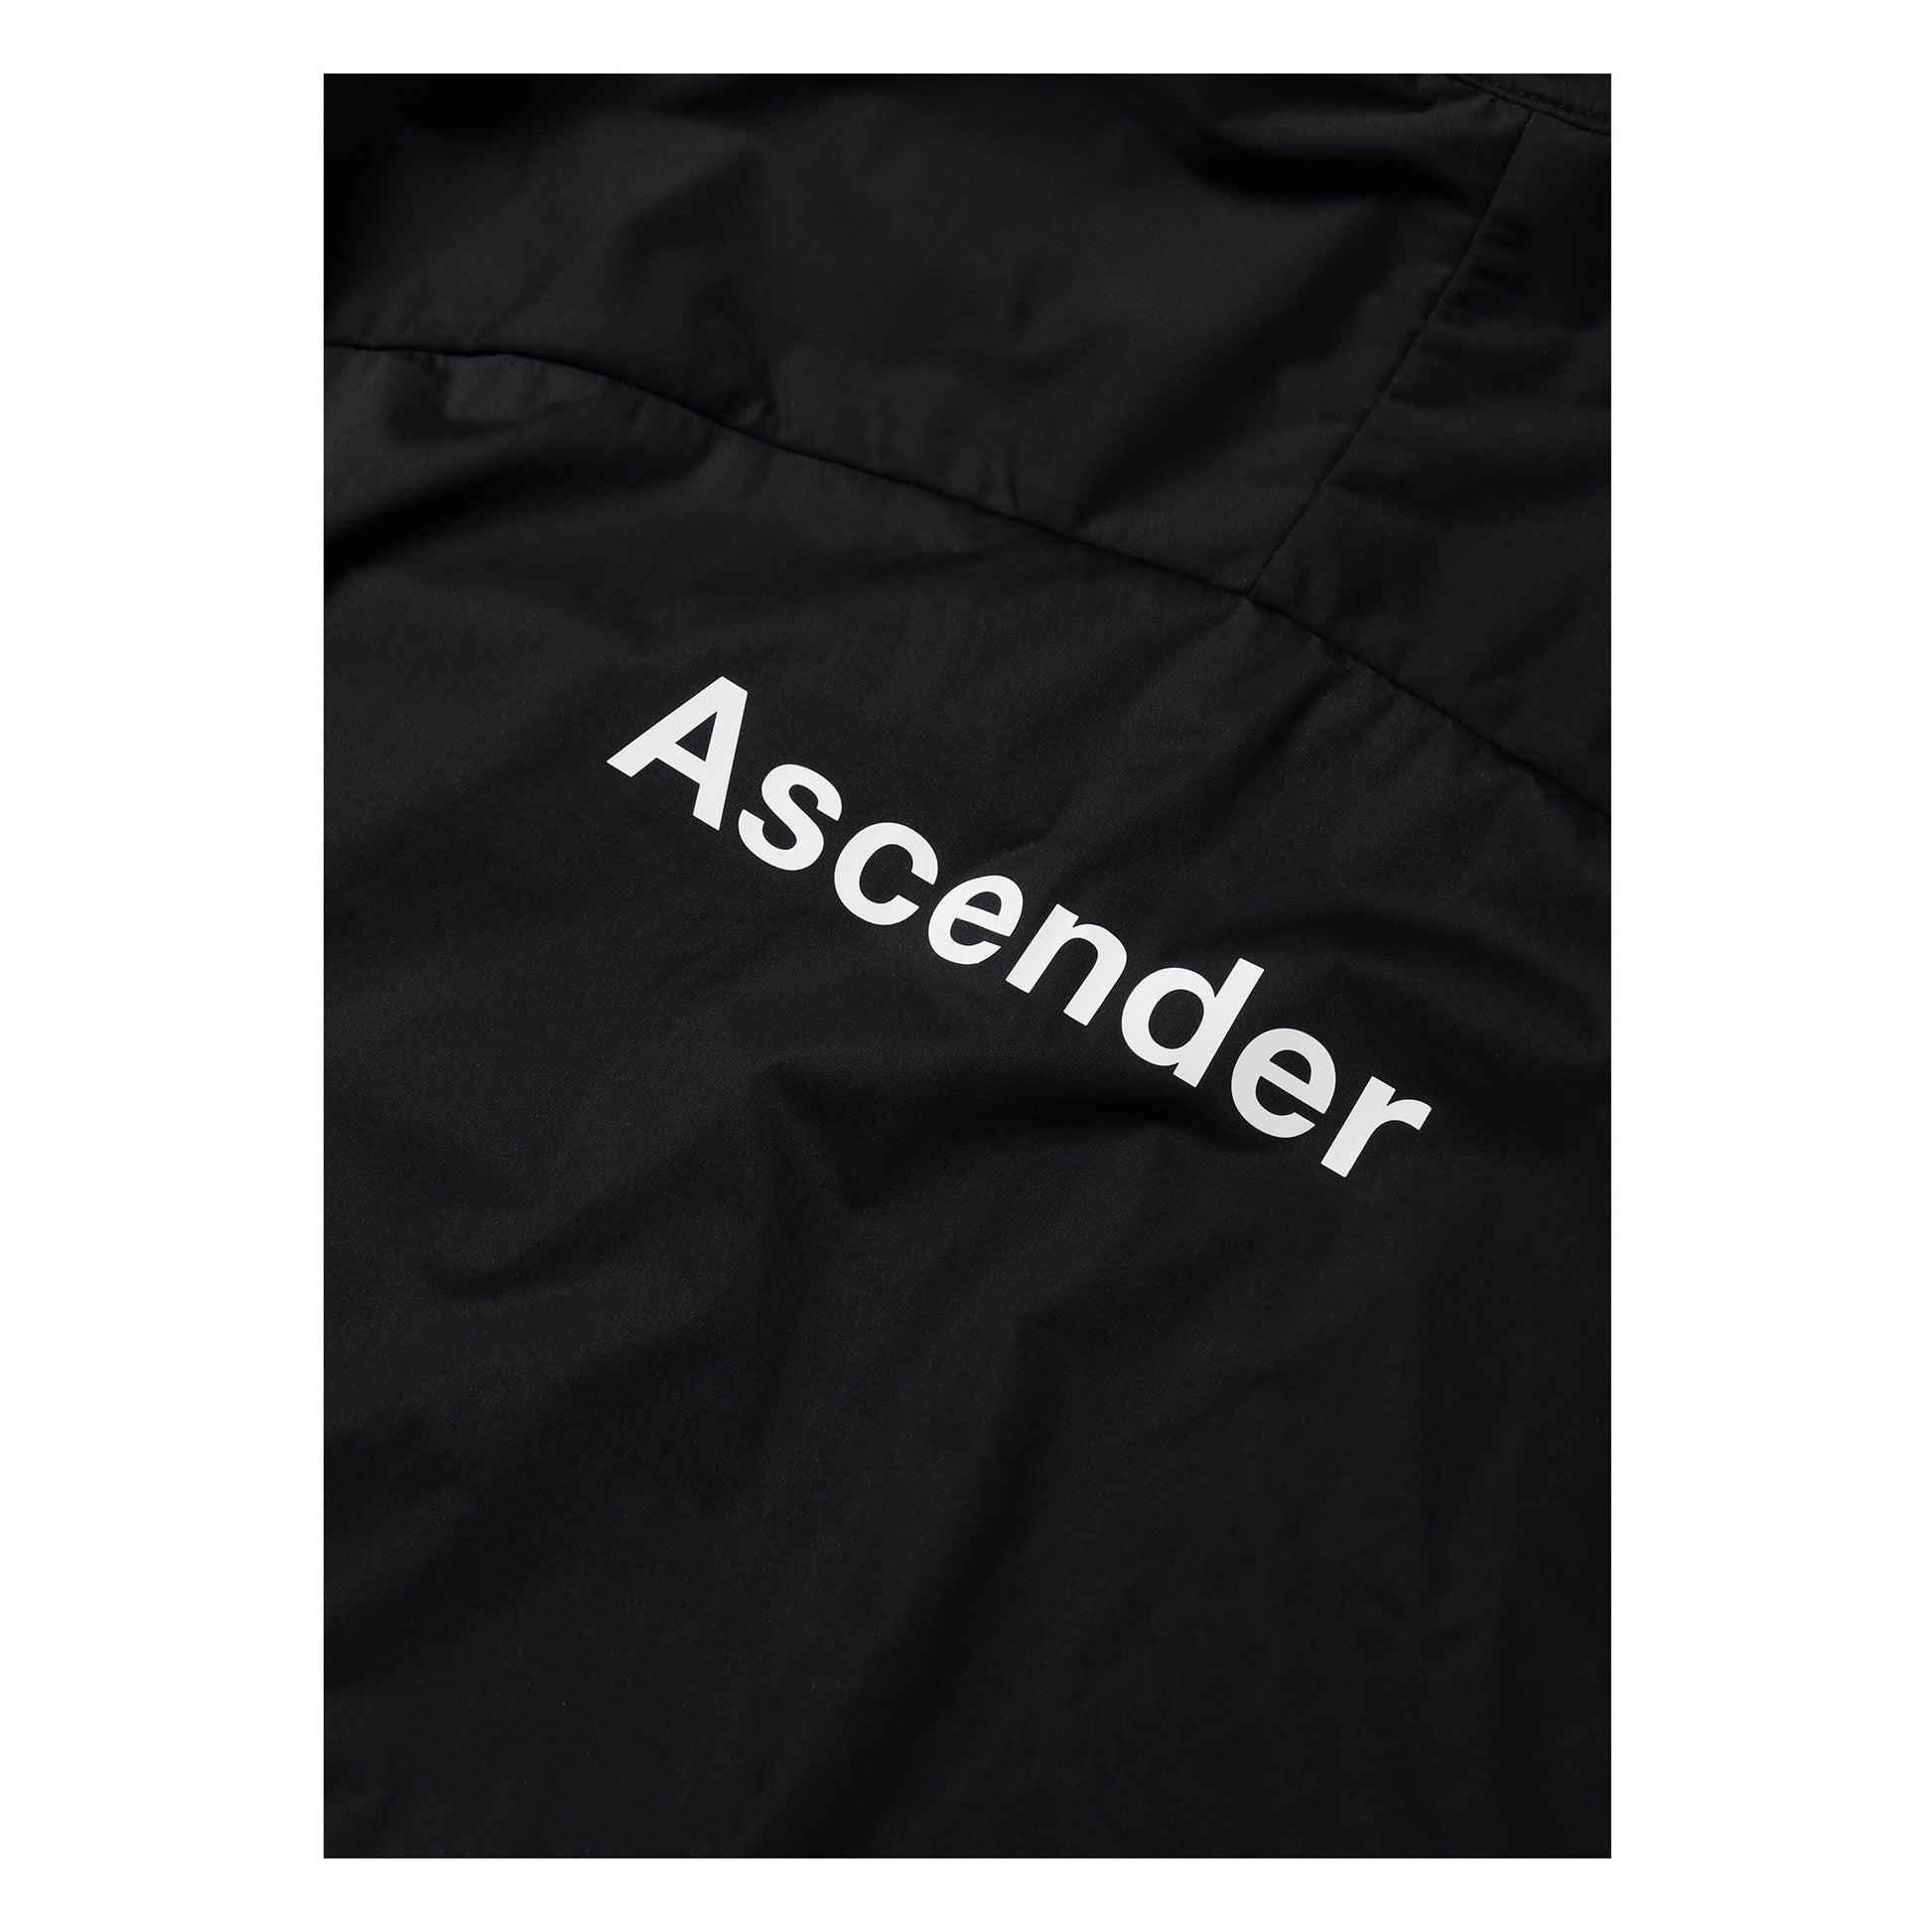 Aquarius Windproof and Waterproof Shield Jacket from Ascender Cycling Club in Zürich Switzerland Back Logo View